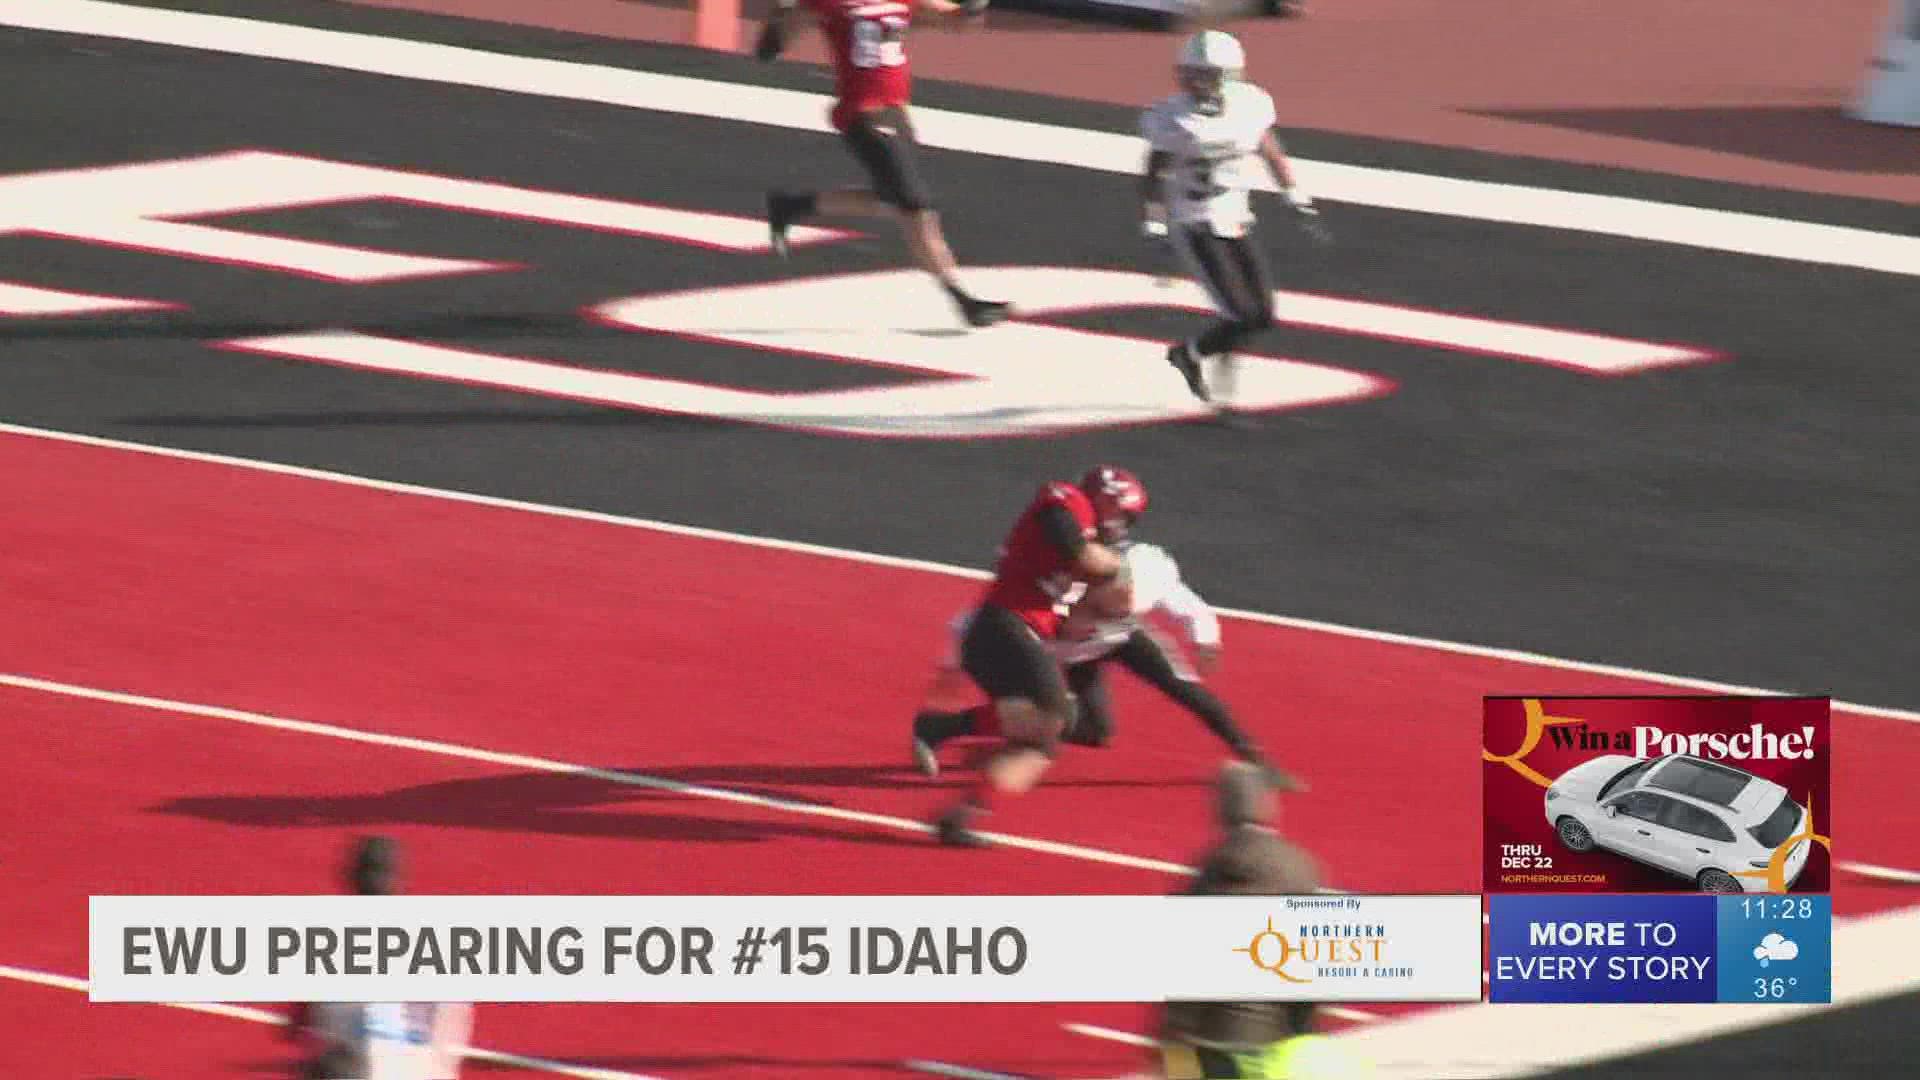 Coming off a tough loss against Portland State, EWU looks to start faster Saturday in their matchup against the Idaho Vandals.